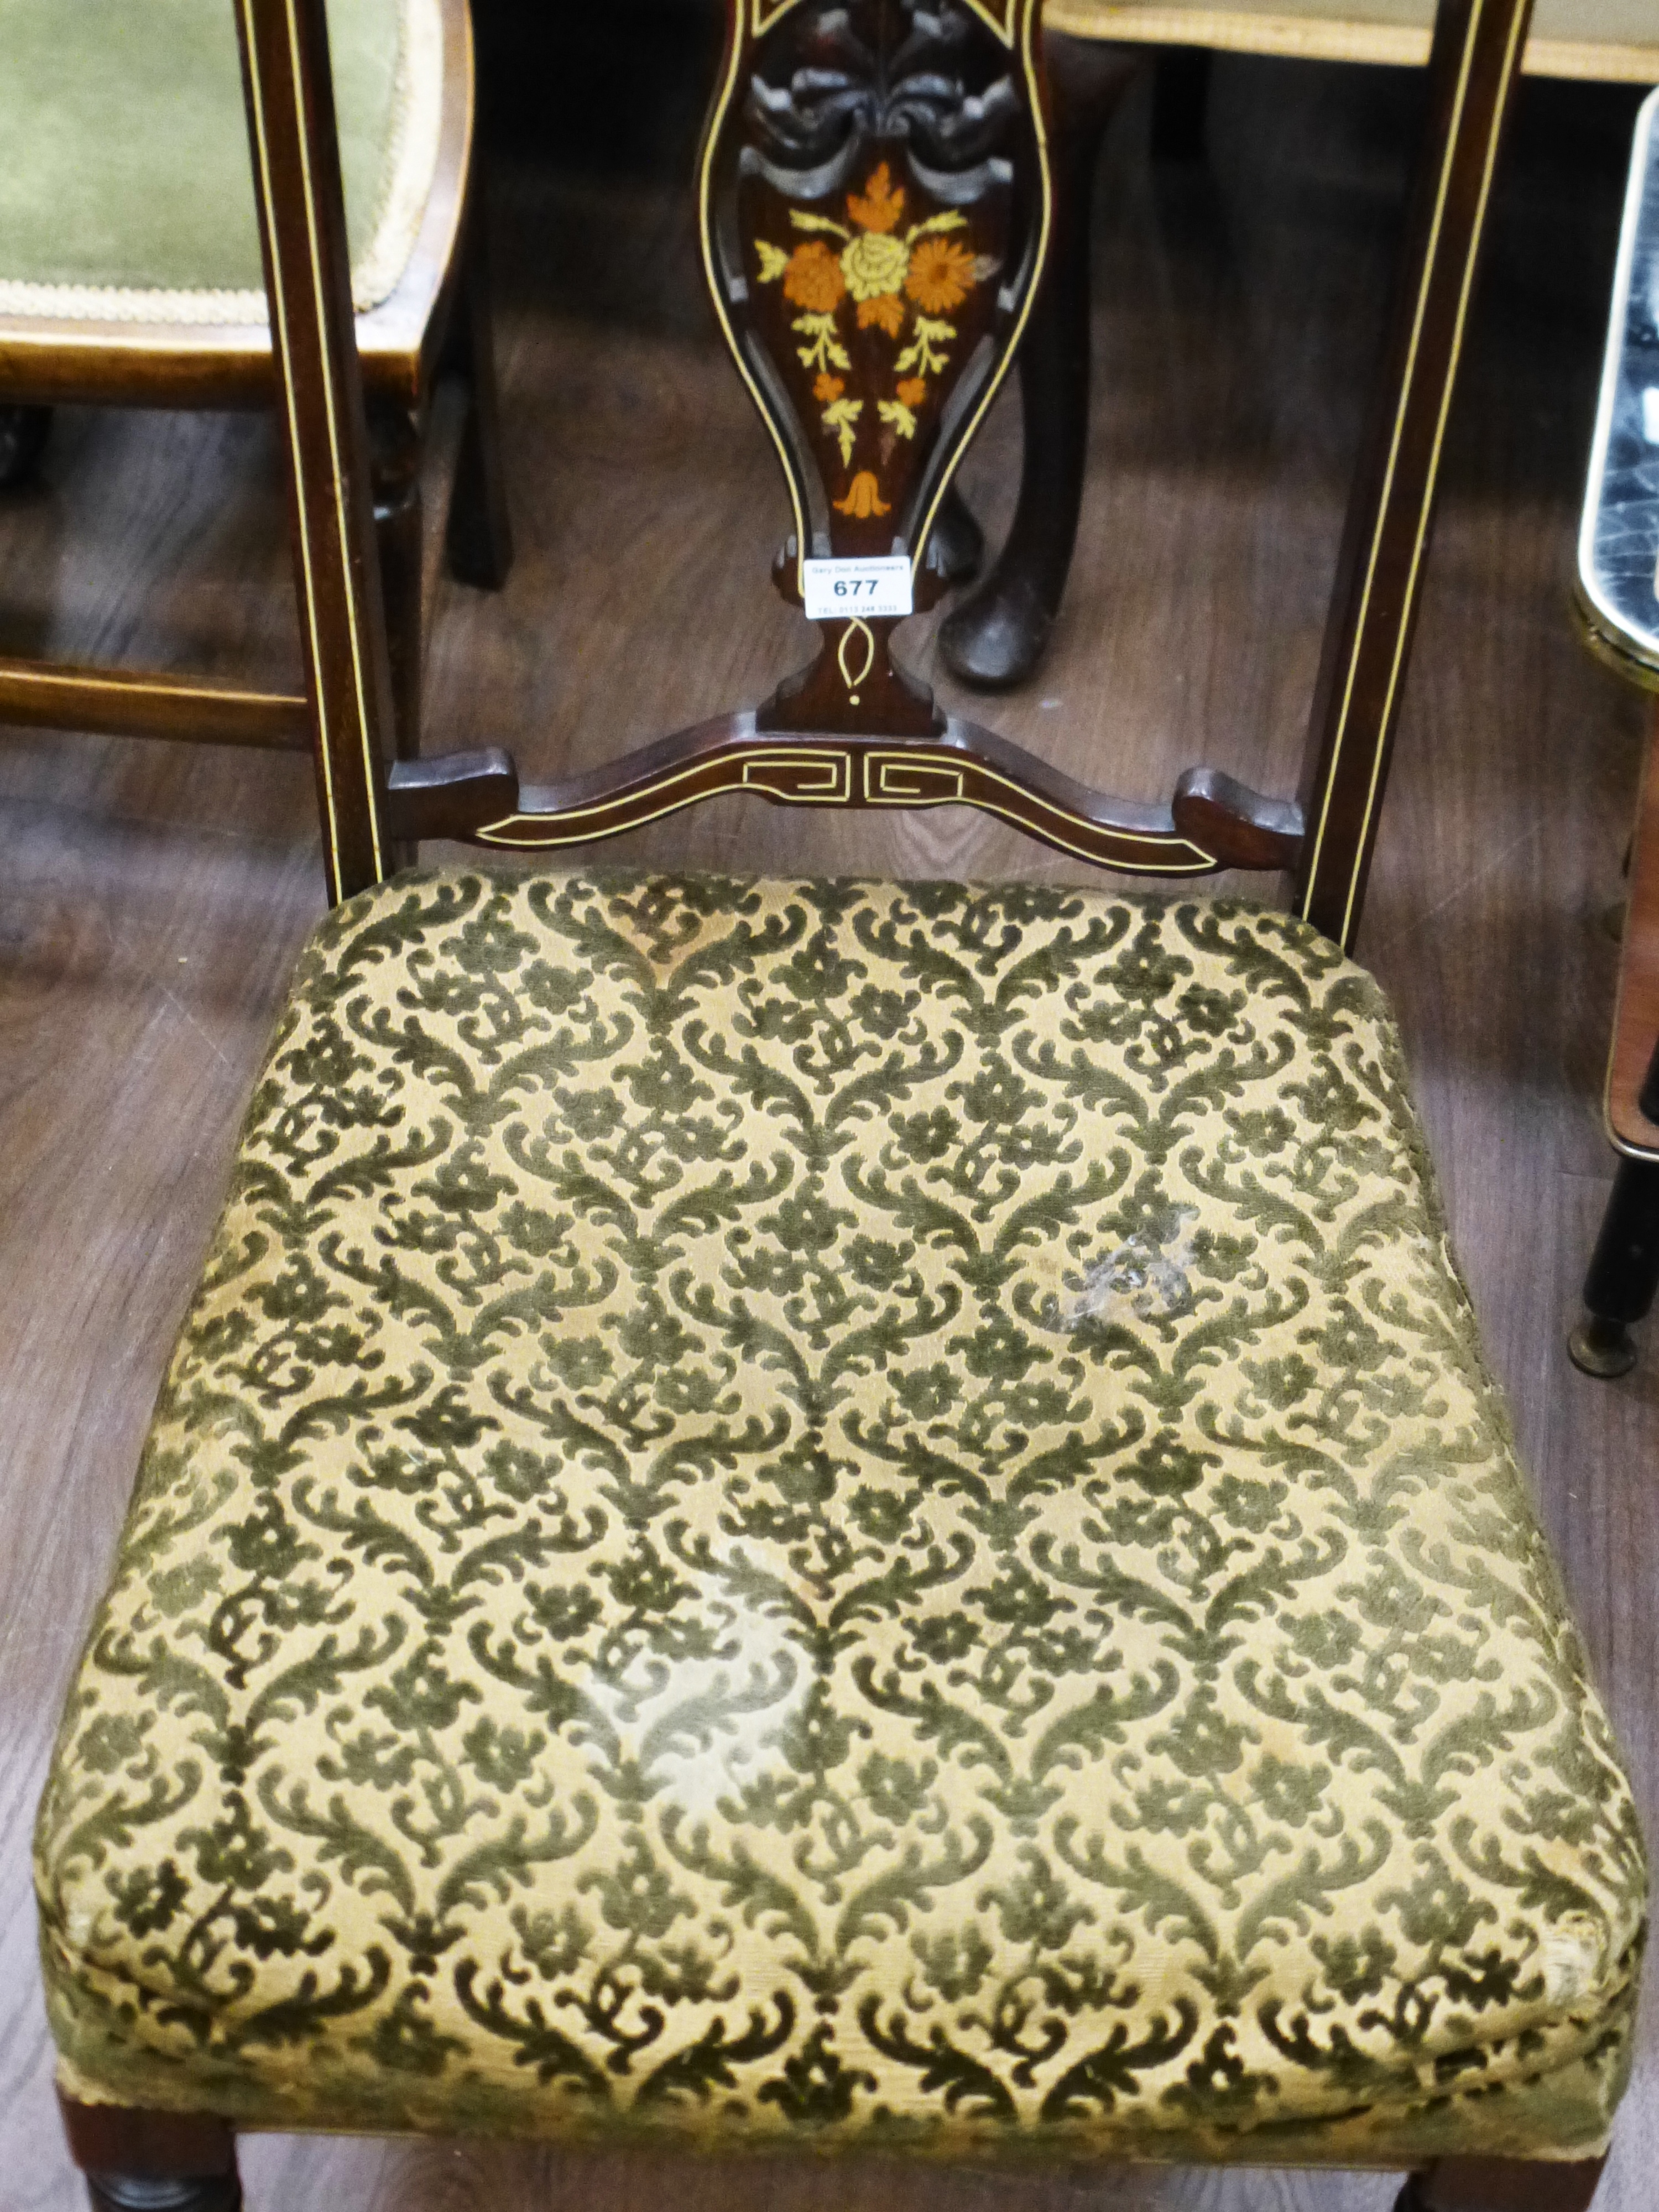 INLAID BEDROOM CHAIR - Image 2 of 4